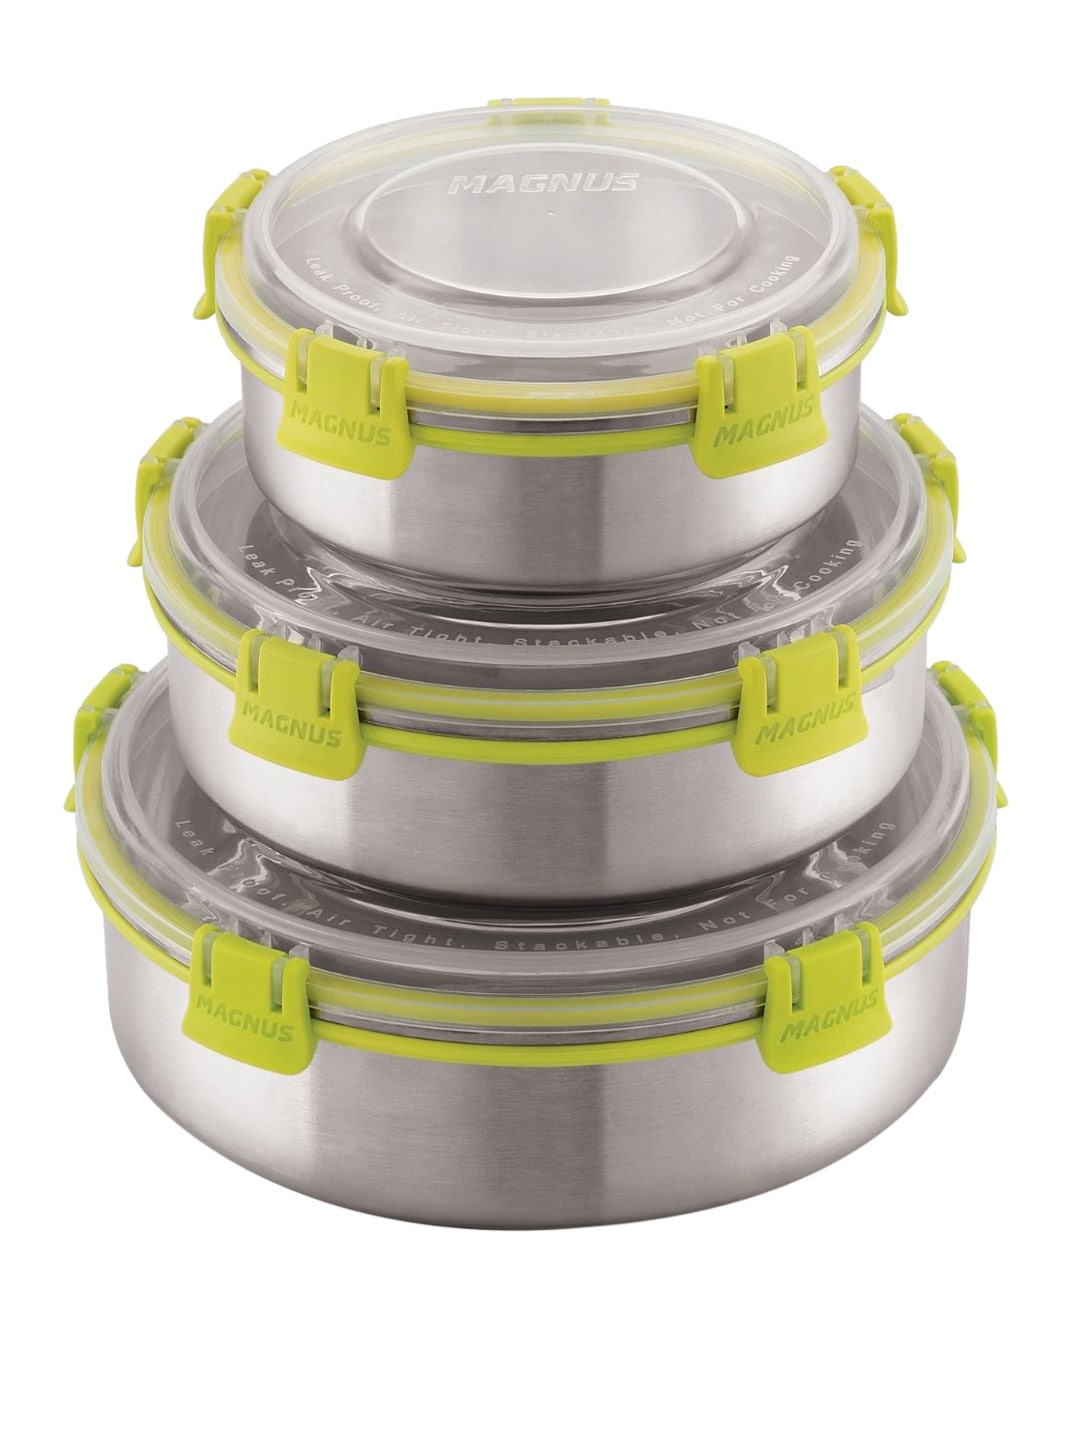 MAGNUS Set Of 3 Silver & Green Stainless Steel Airtight & Leakproof Storage Containers Price in India